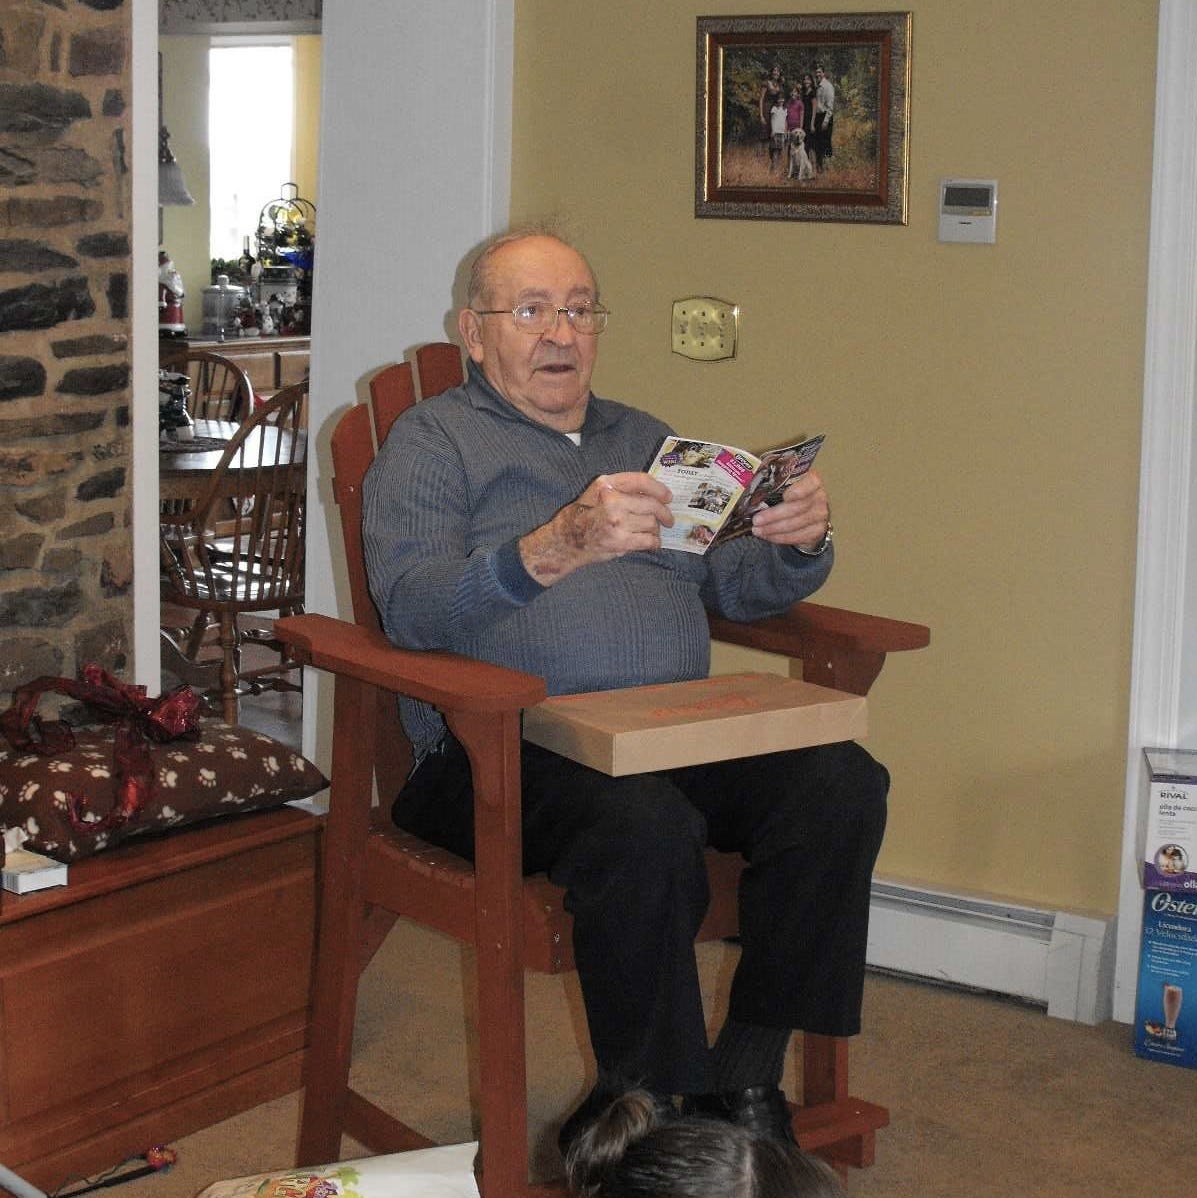 85-year-old uncle sits in his Christmas gift--an Adirondack chair that's a comfortable height